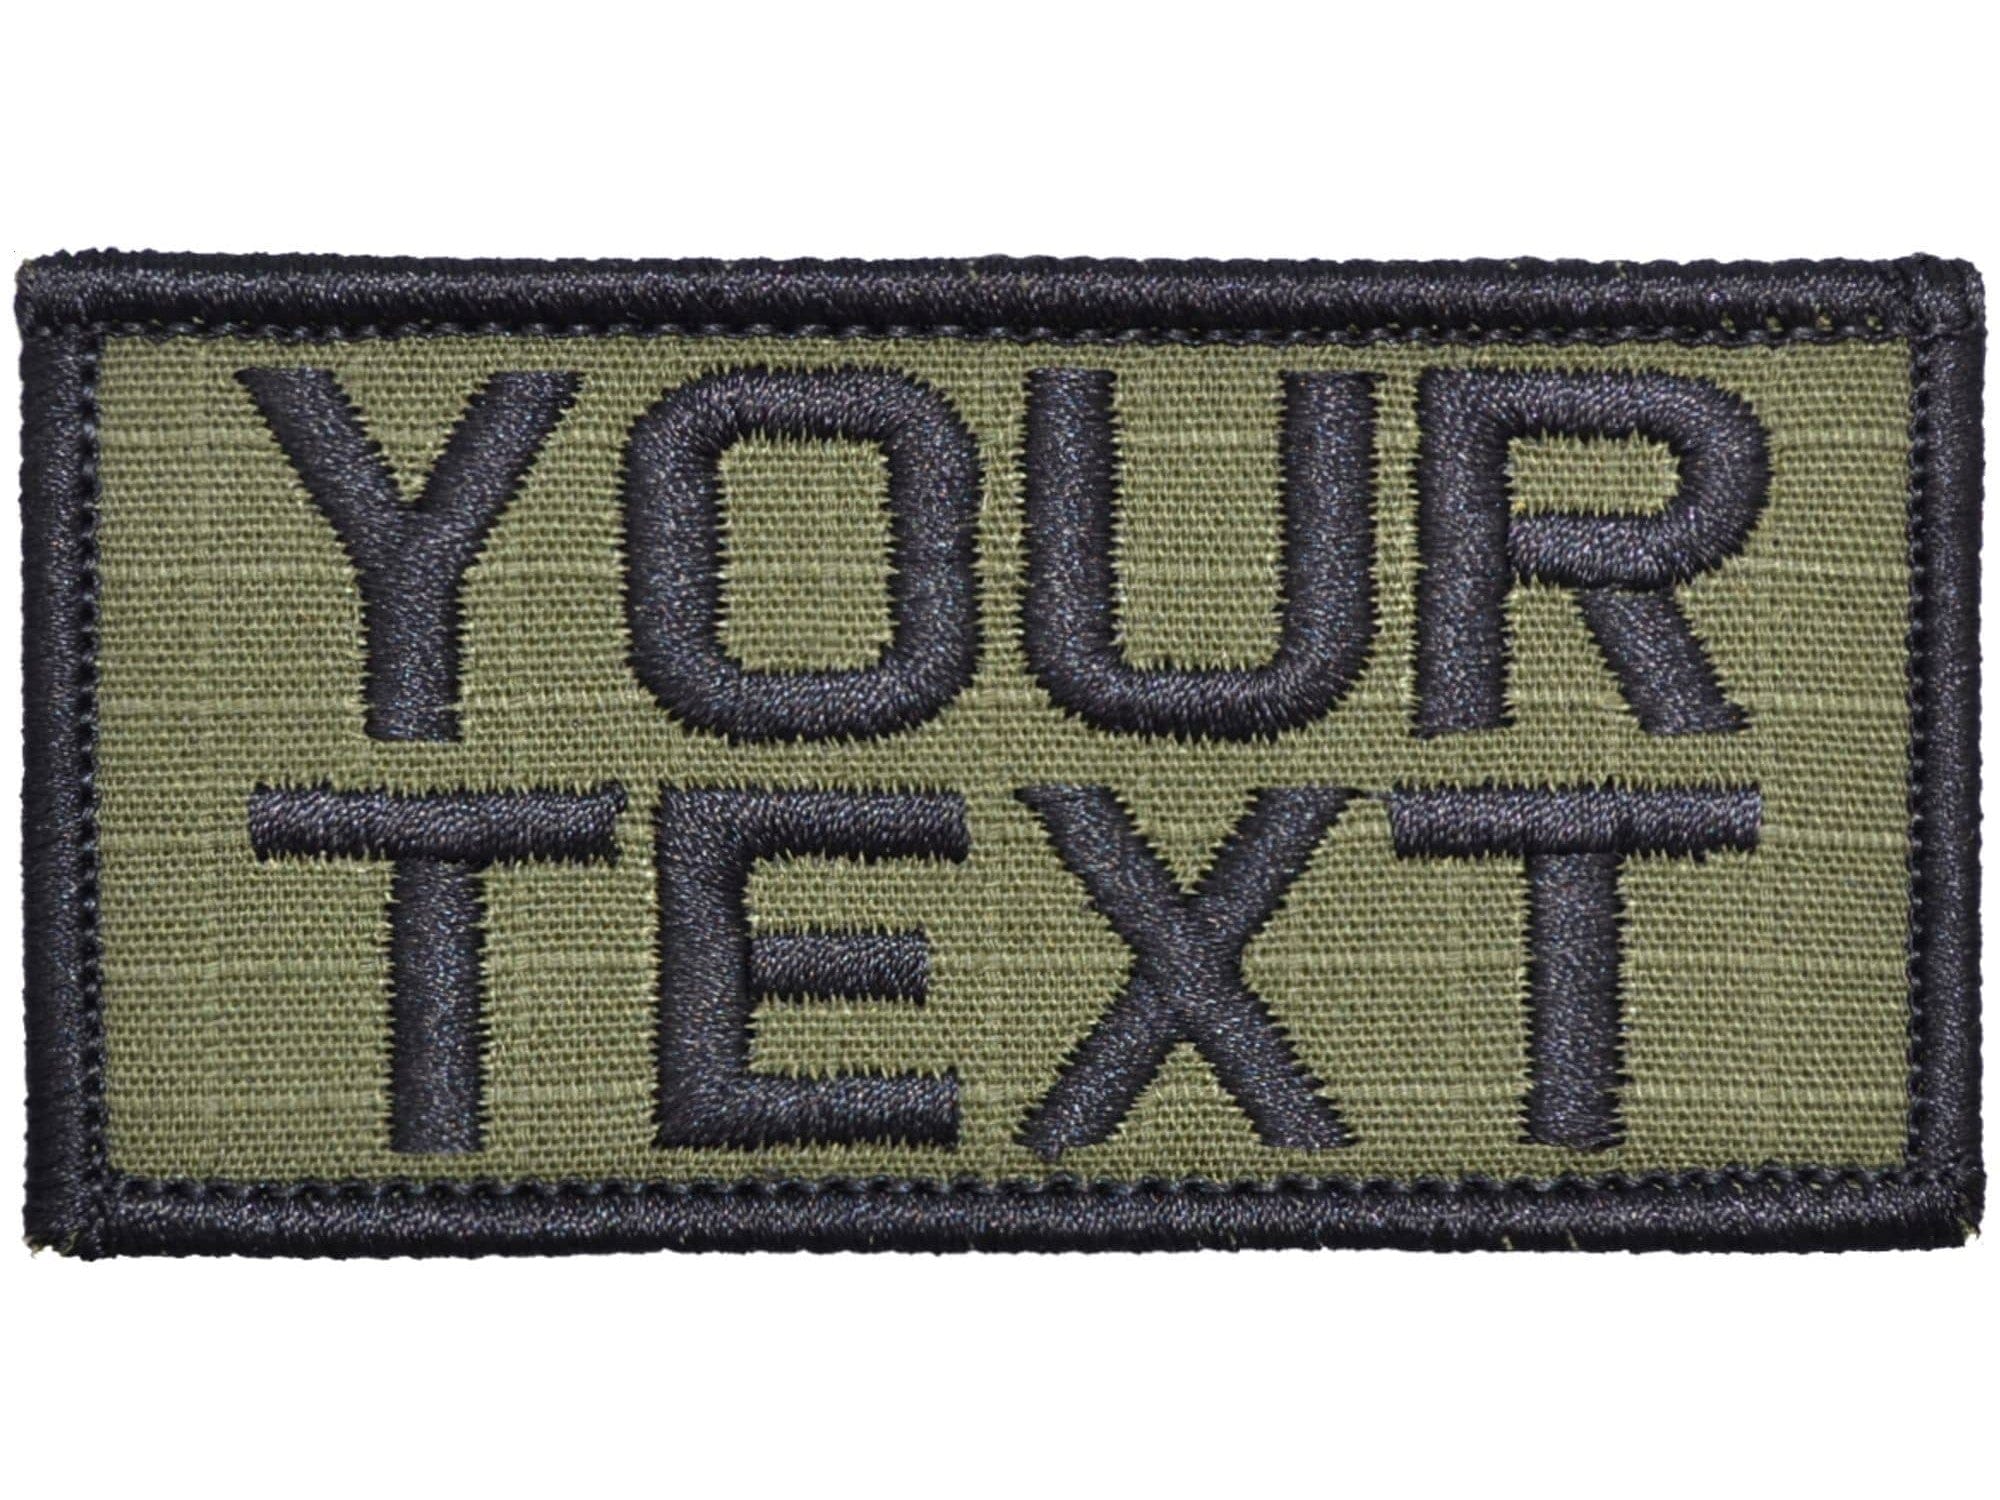 Custom Velcro Patches, Make Your Own Patches